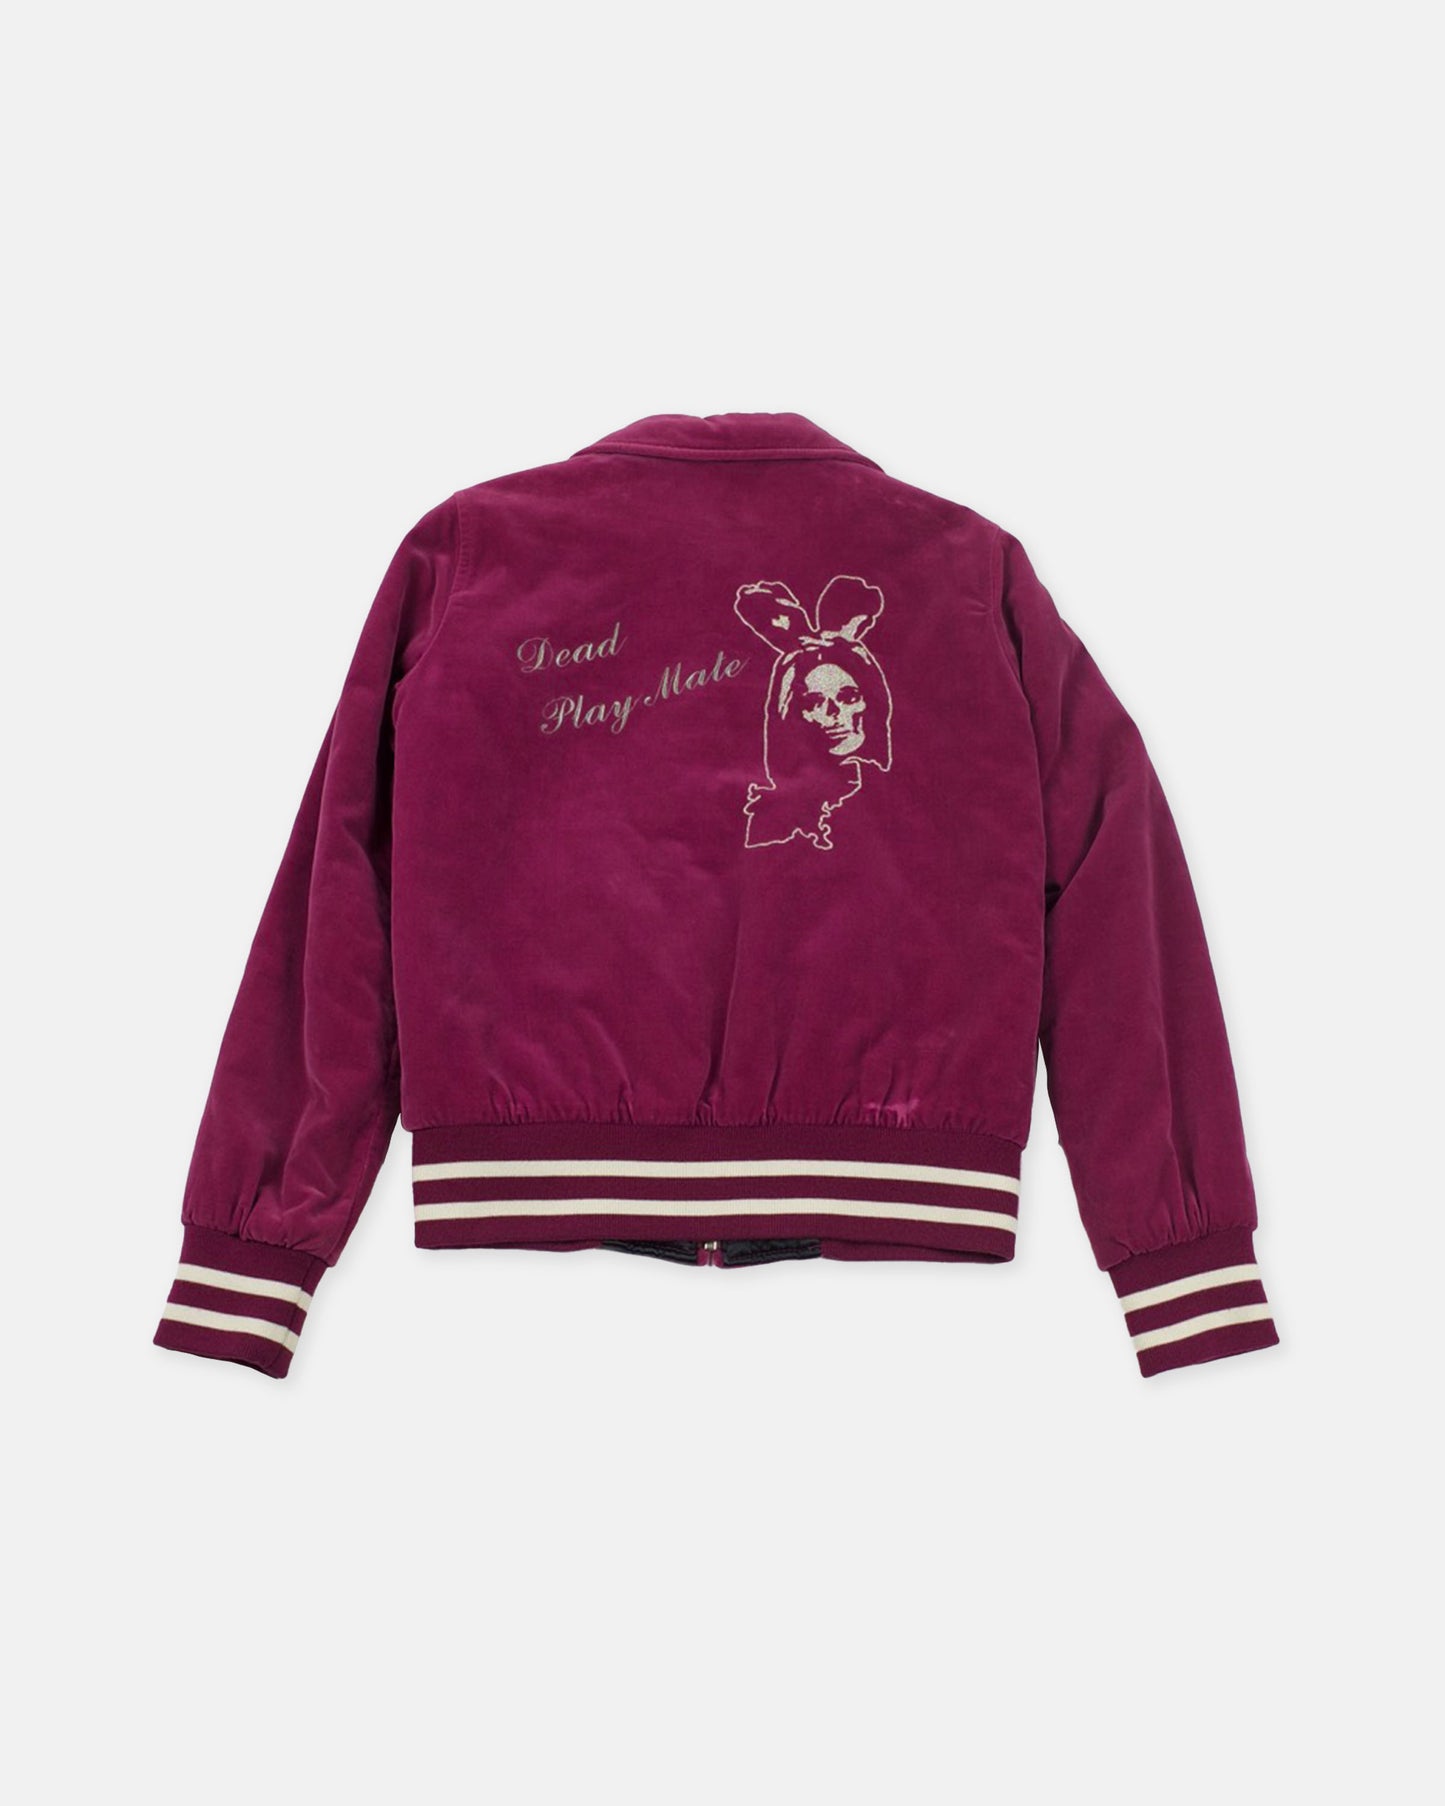 Hysteric Glamour Pink Velour Jacket